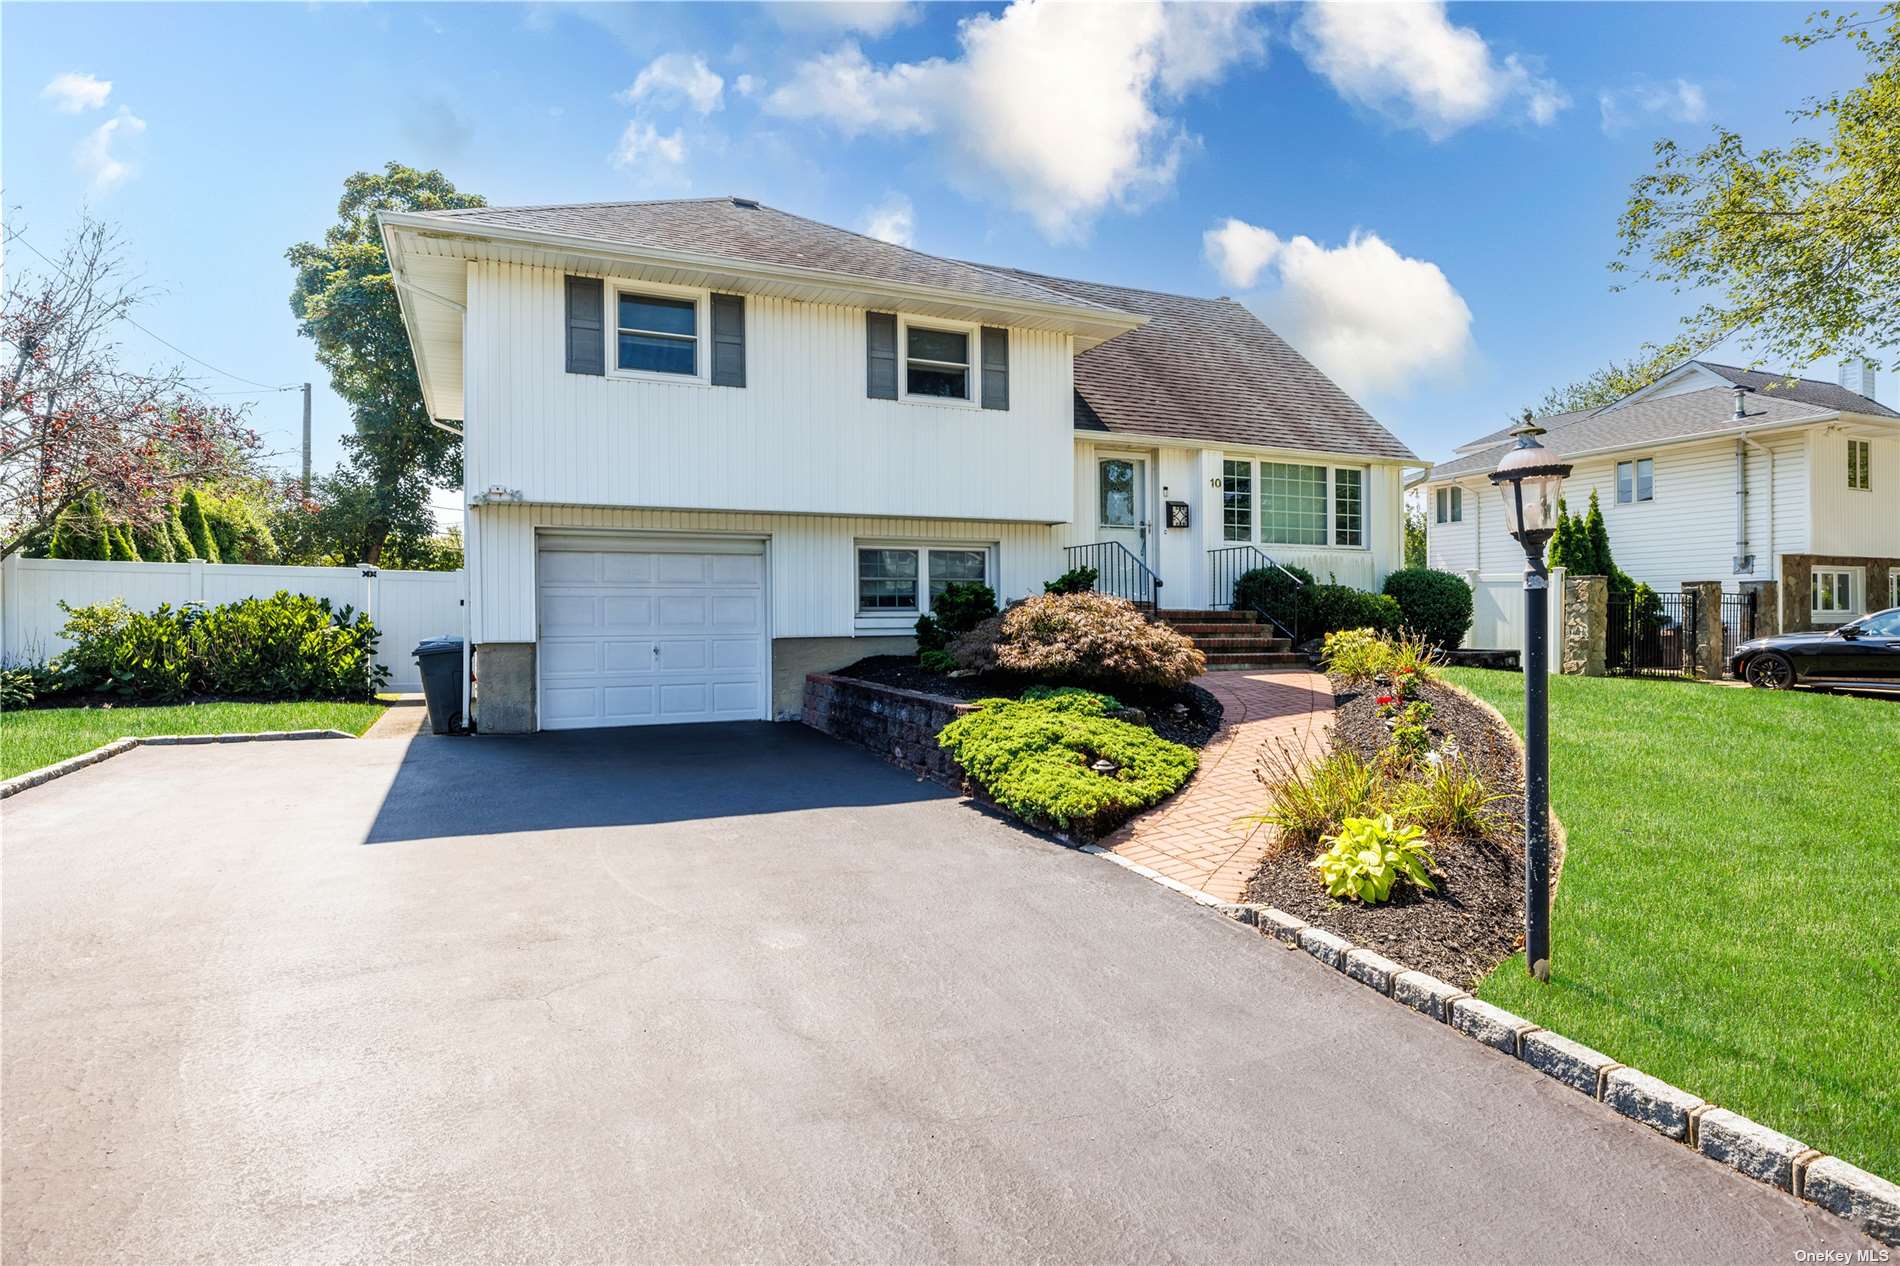 Listing in Commack, NY